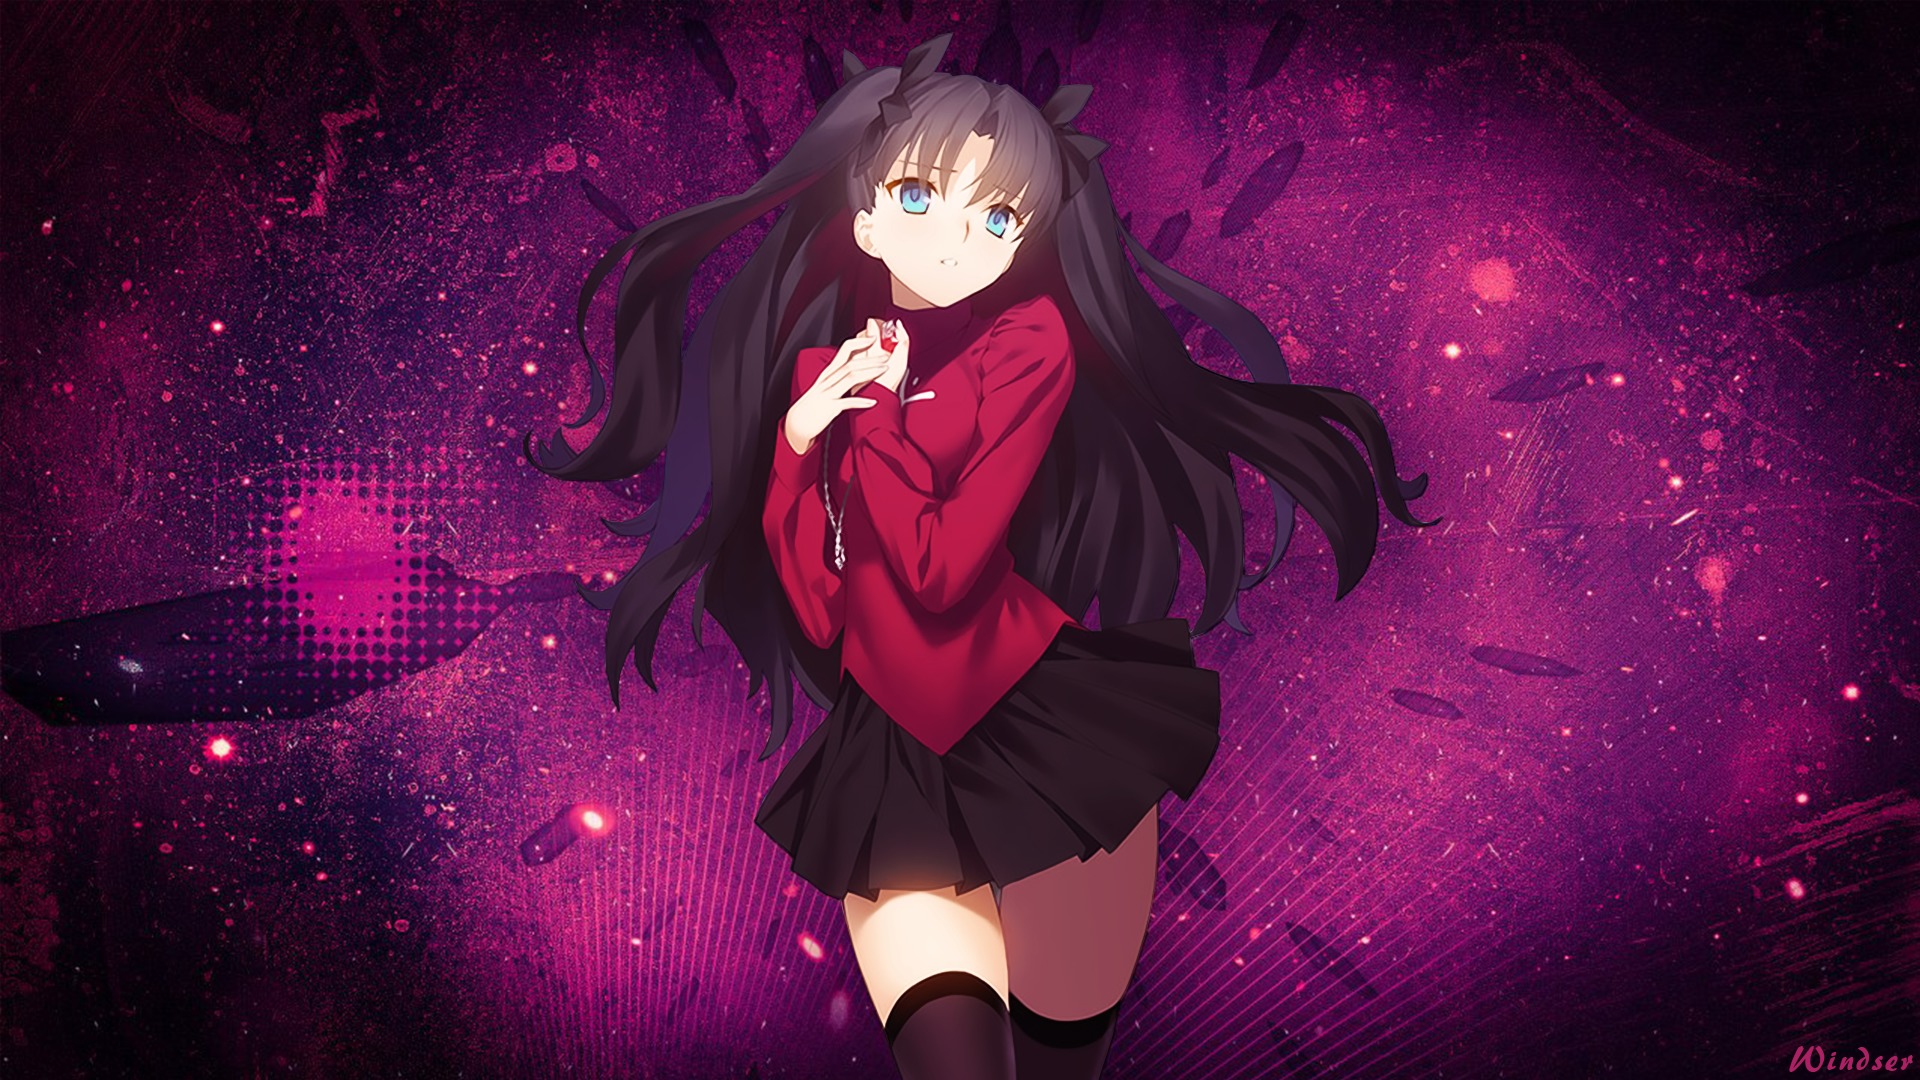 1680x Rin Tohsaka Fate Stay Night Unlimited Blade Works 1680x Resolution Wallpaper Hd Anime 4k Wallpapers Images Photos And Background Wallpapers Den